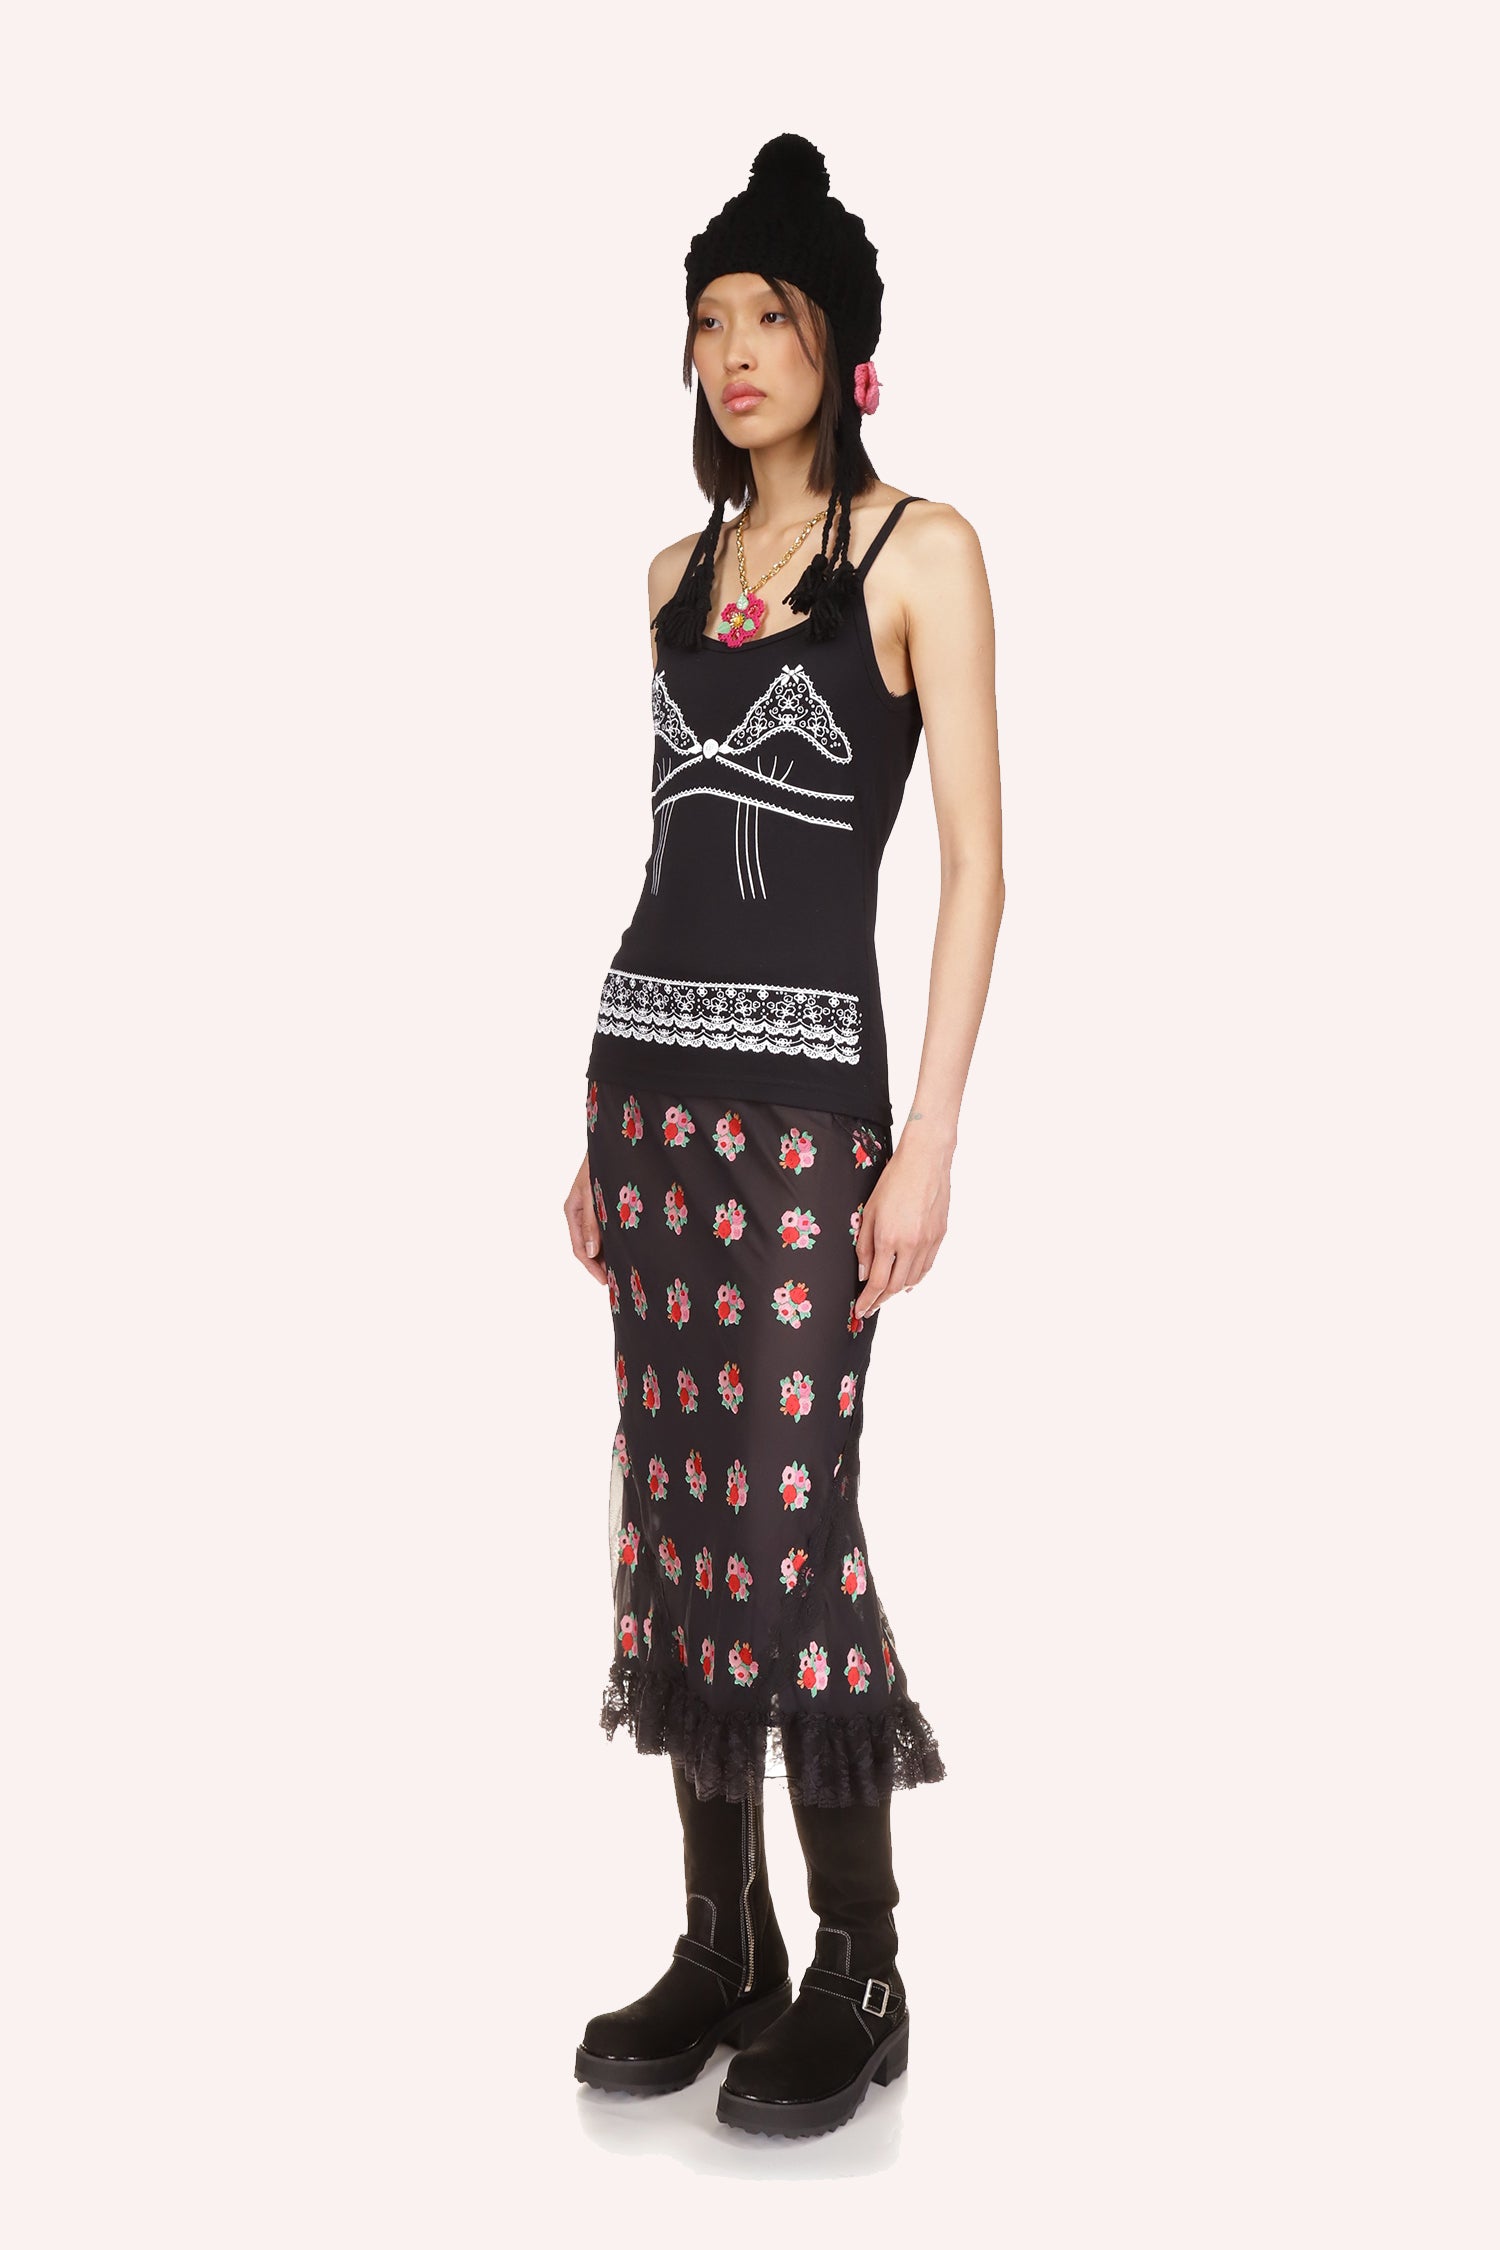 The Anna Sui's Rosie Posie Skirt Black is under knee long, with see-through effect from the knee down, black lace at bottom